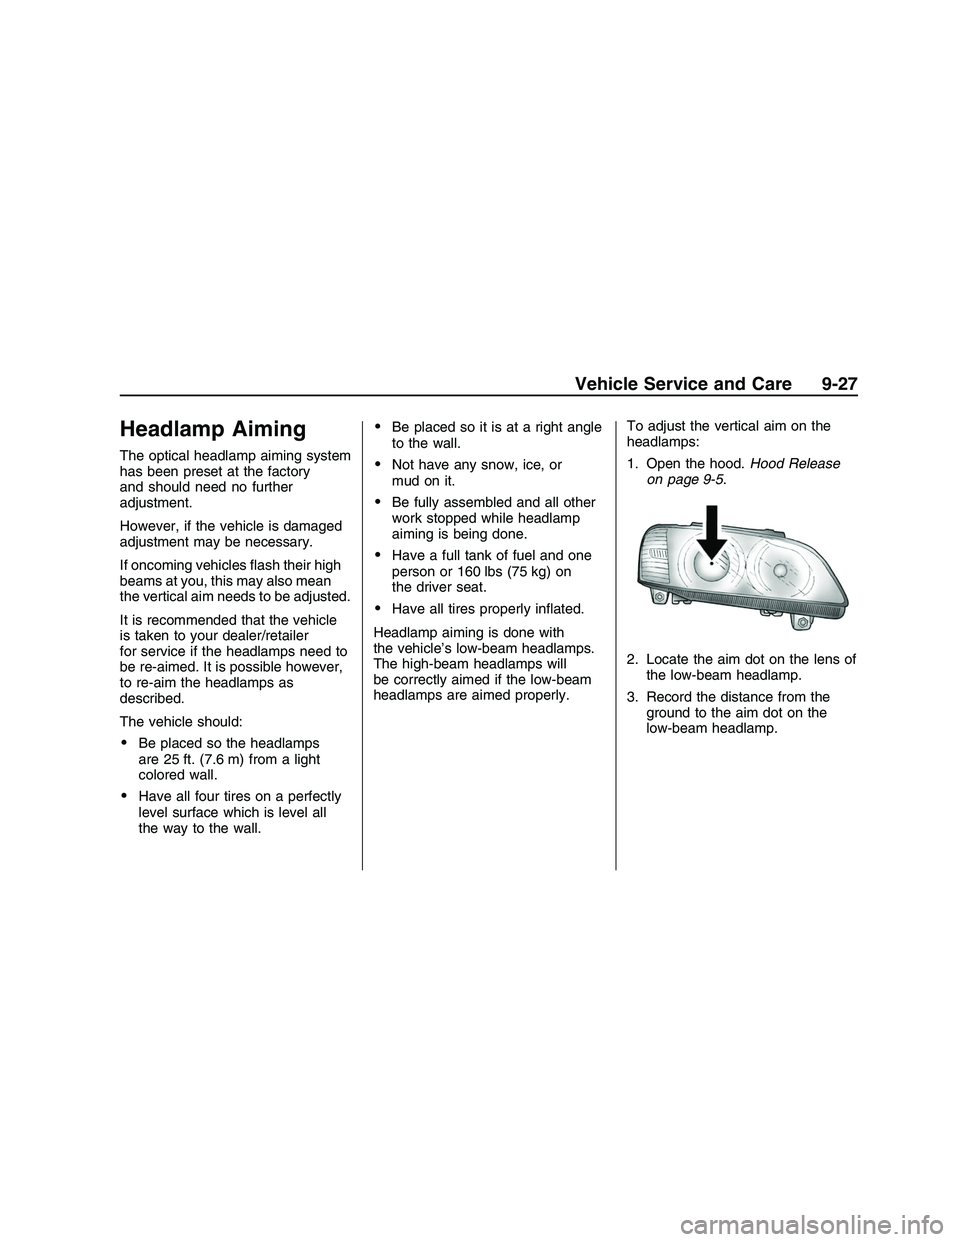 PONTIAC G8 2008  Owners Manual Headlamp Aiming
The optical headlamp aiming system
has been preset at the factory
and should need no further
adjustment.
However, if the vehicle is damaged
adjustment may be necessary.
If oncoming veh